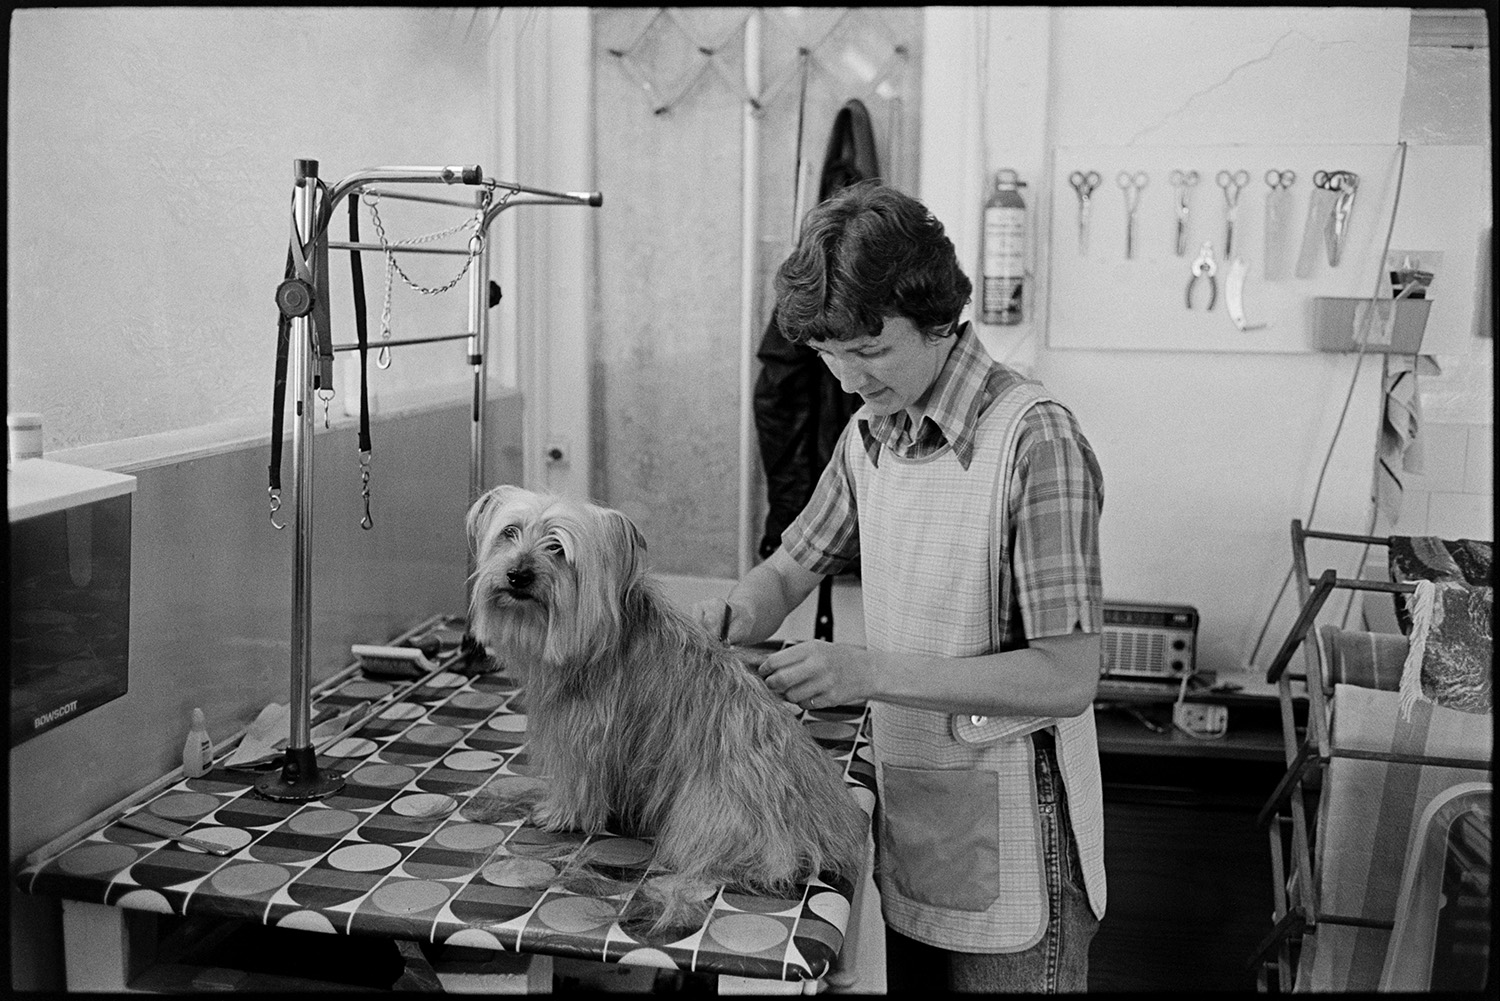 Women shampooing dogs in pet parlour, dogs with hair dryers. 
[A woman grooming a dog at 'Bonny Pets' pets parlour at East the Water, Bideford. Leads are hung up by the grooming table and scissors can be seen hung on the wall in the background.]